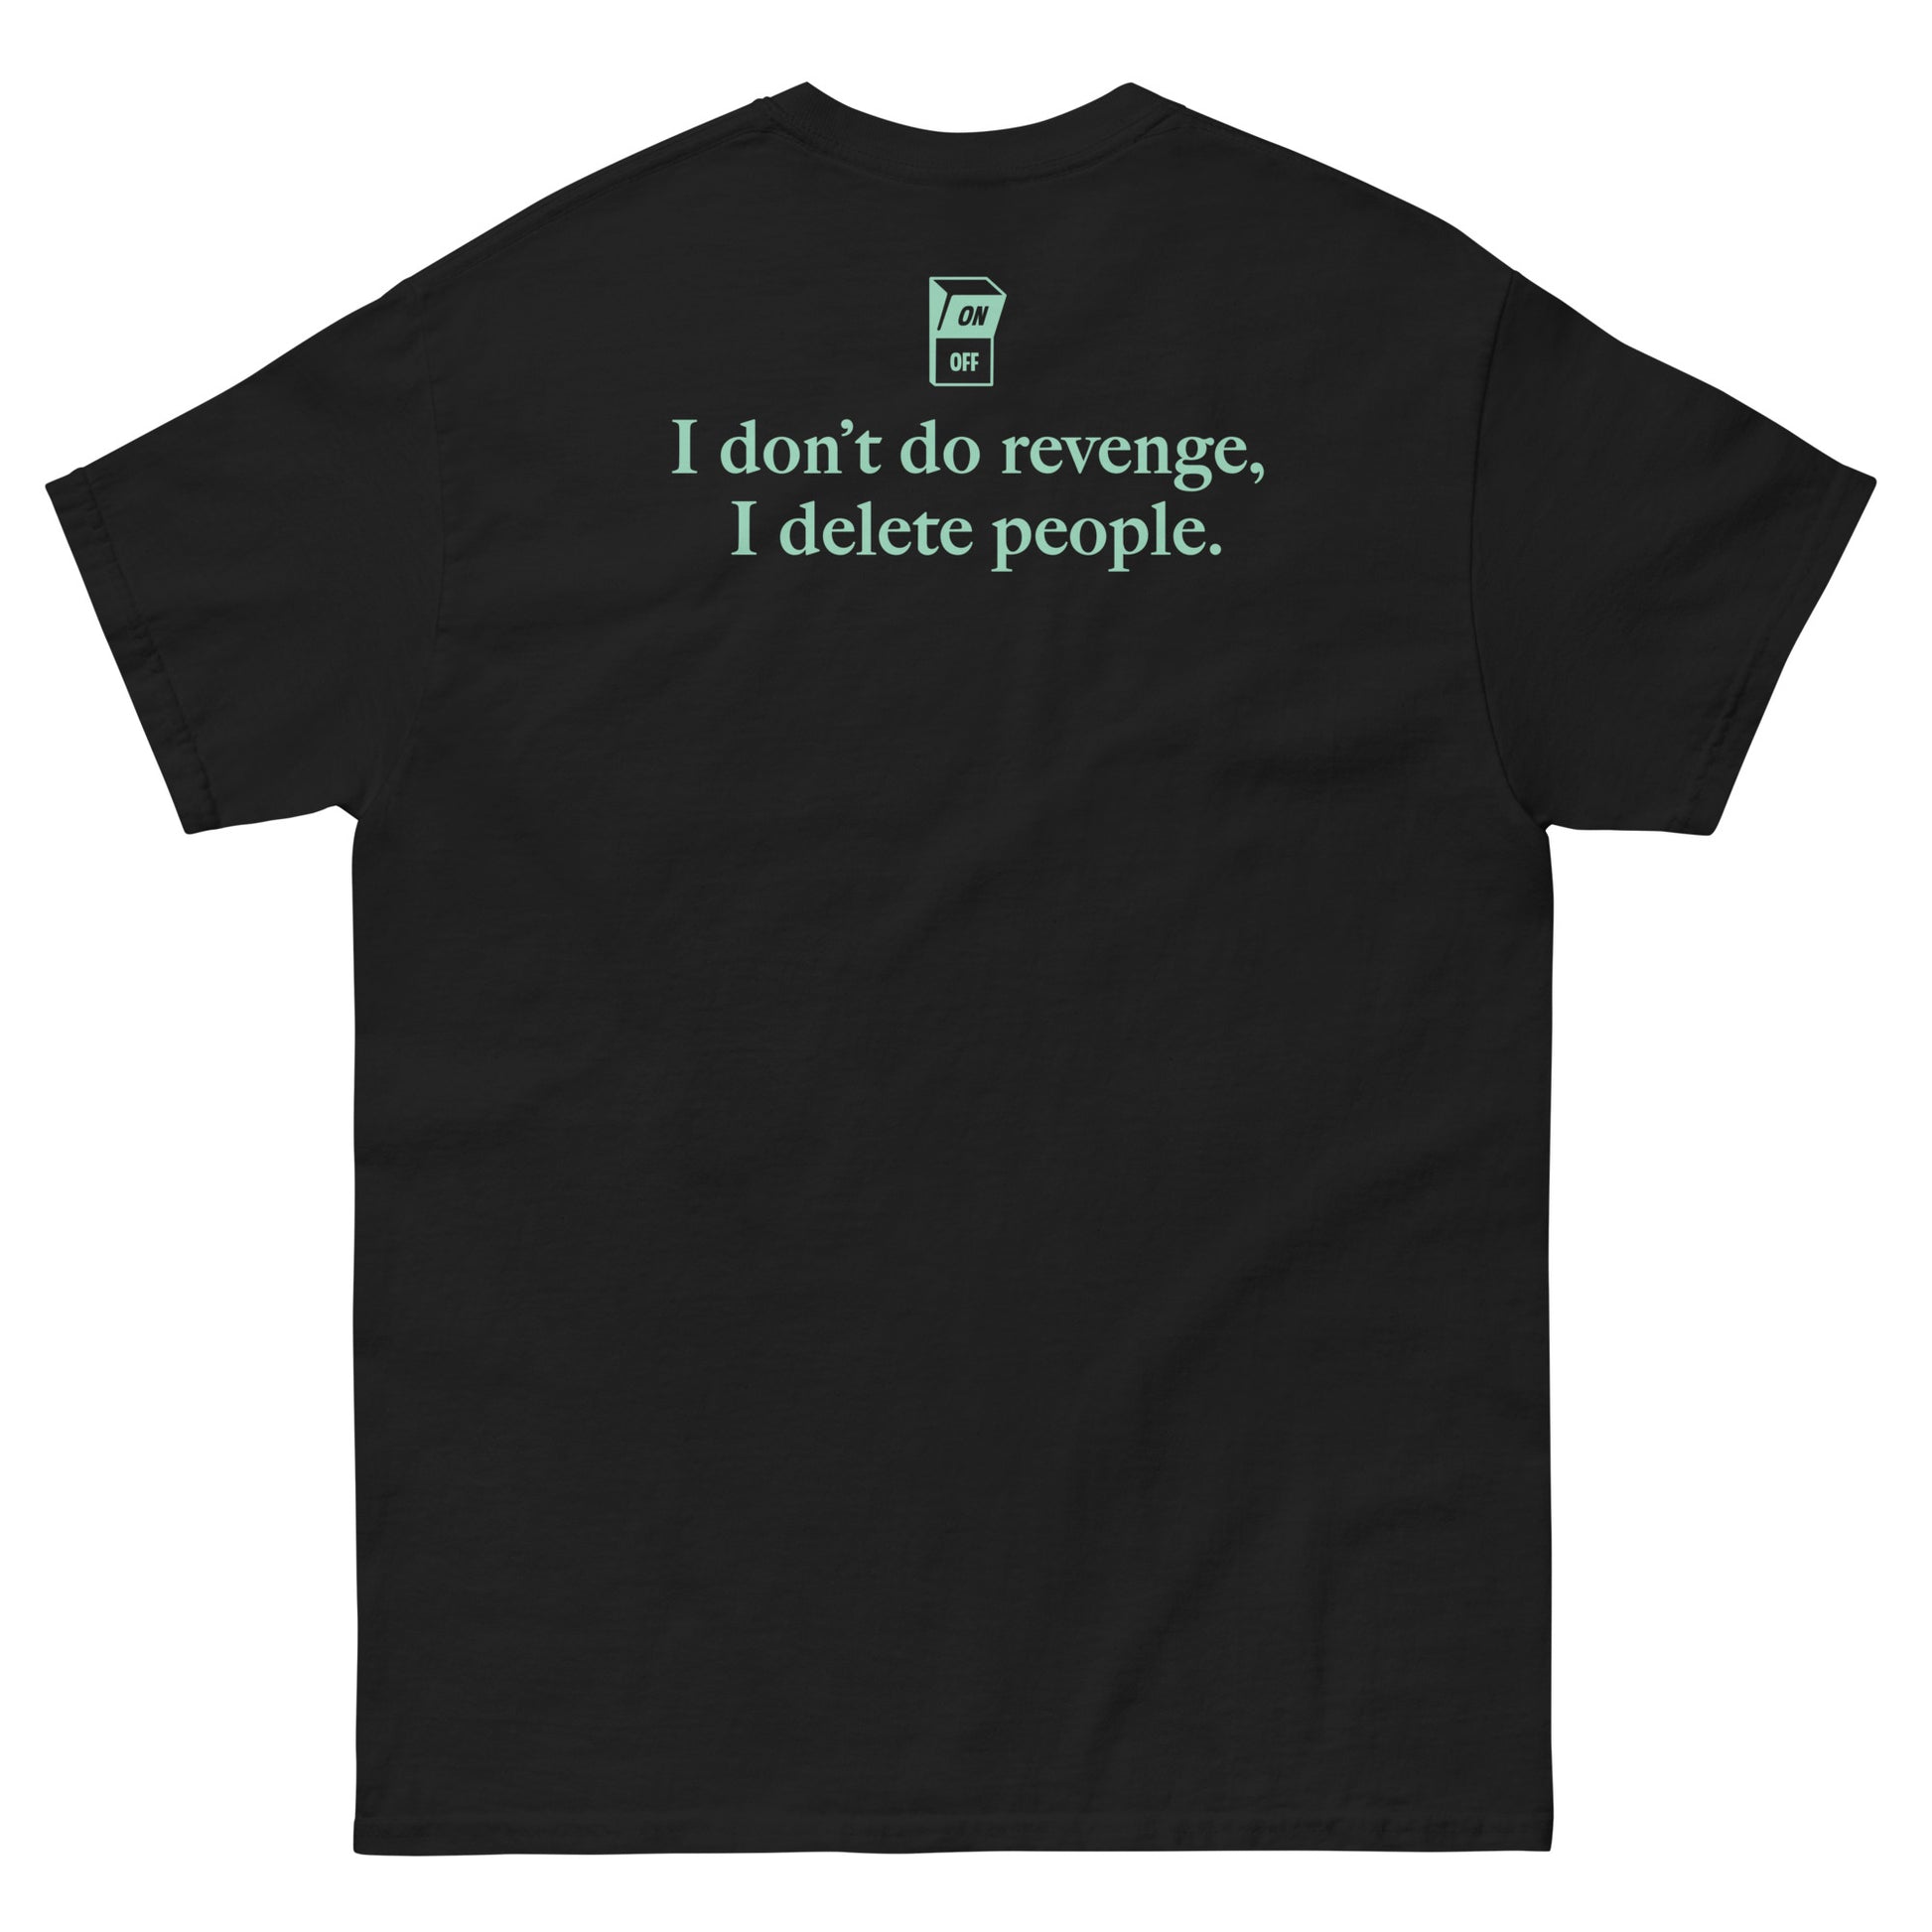 Black High Quality Tee - Front Design with "I don't do revenge, I delete people. " print on left chest - Back Design with a Phrase "I don't do revenge, I delete people." print